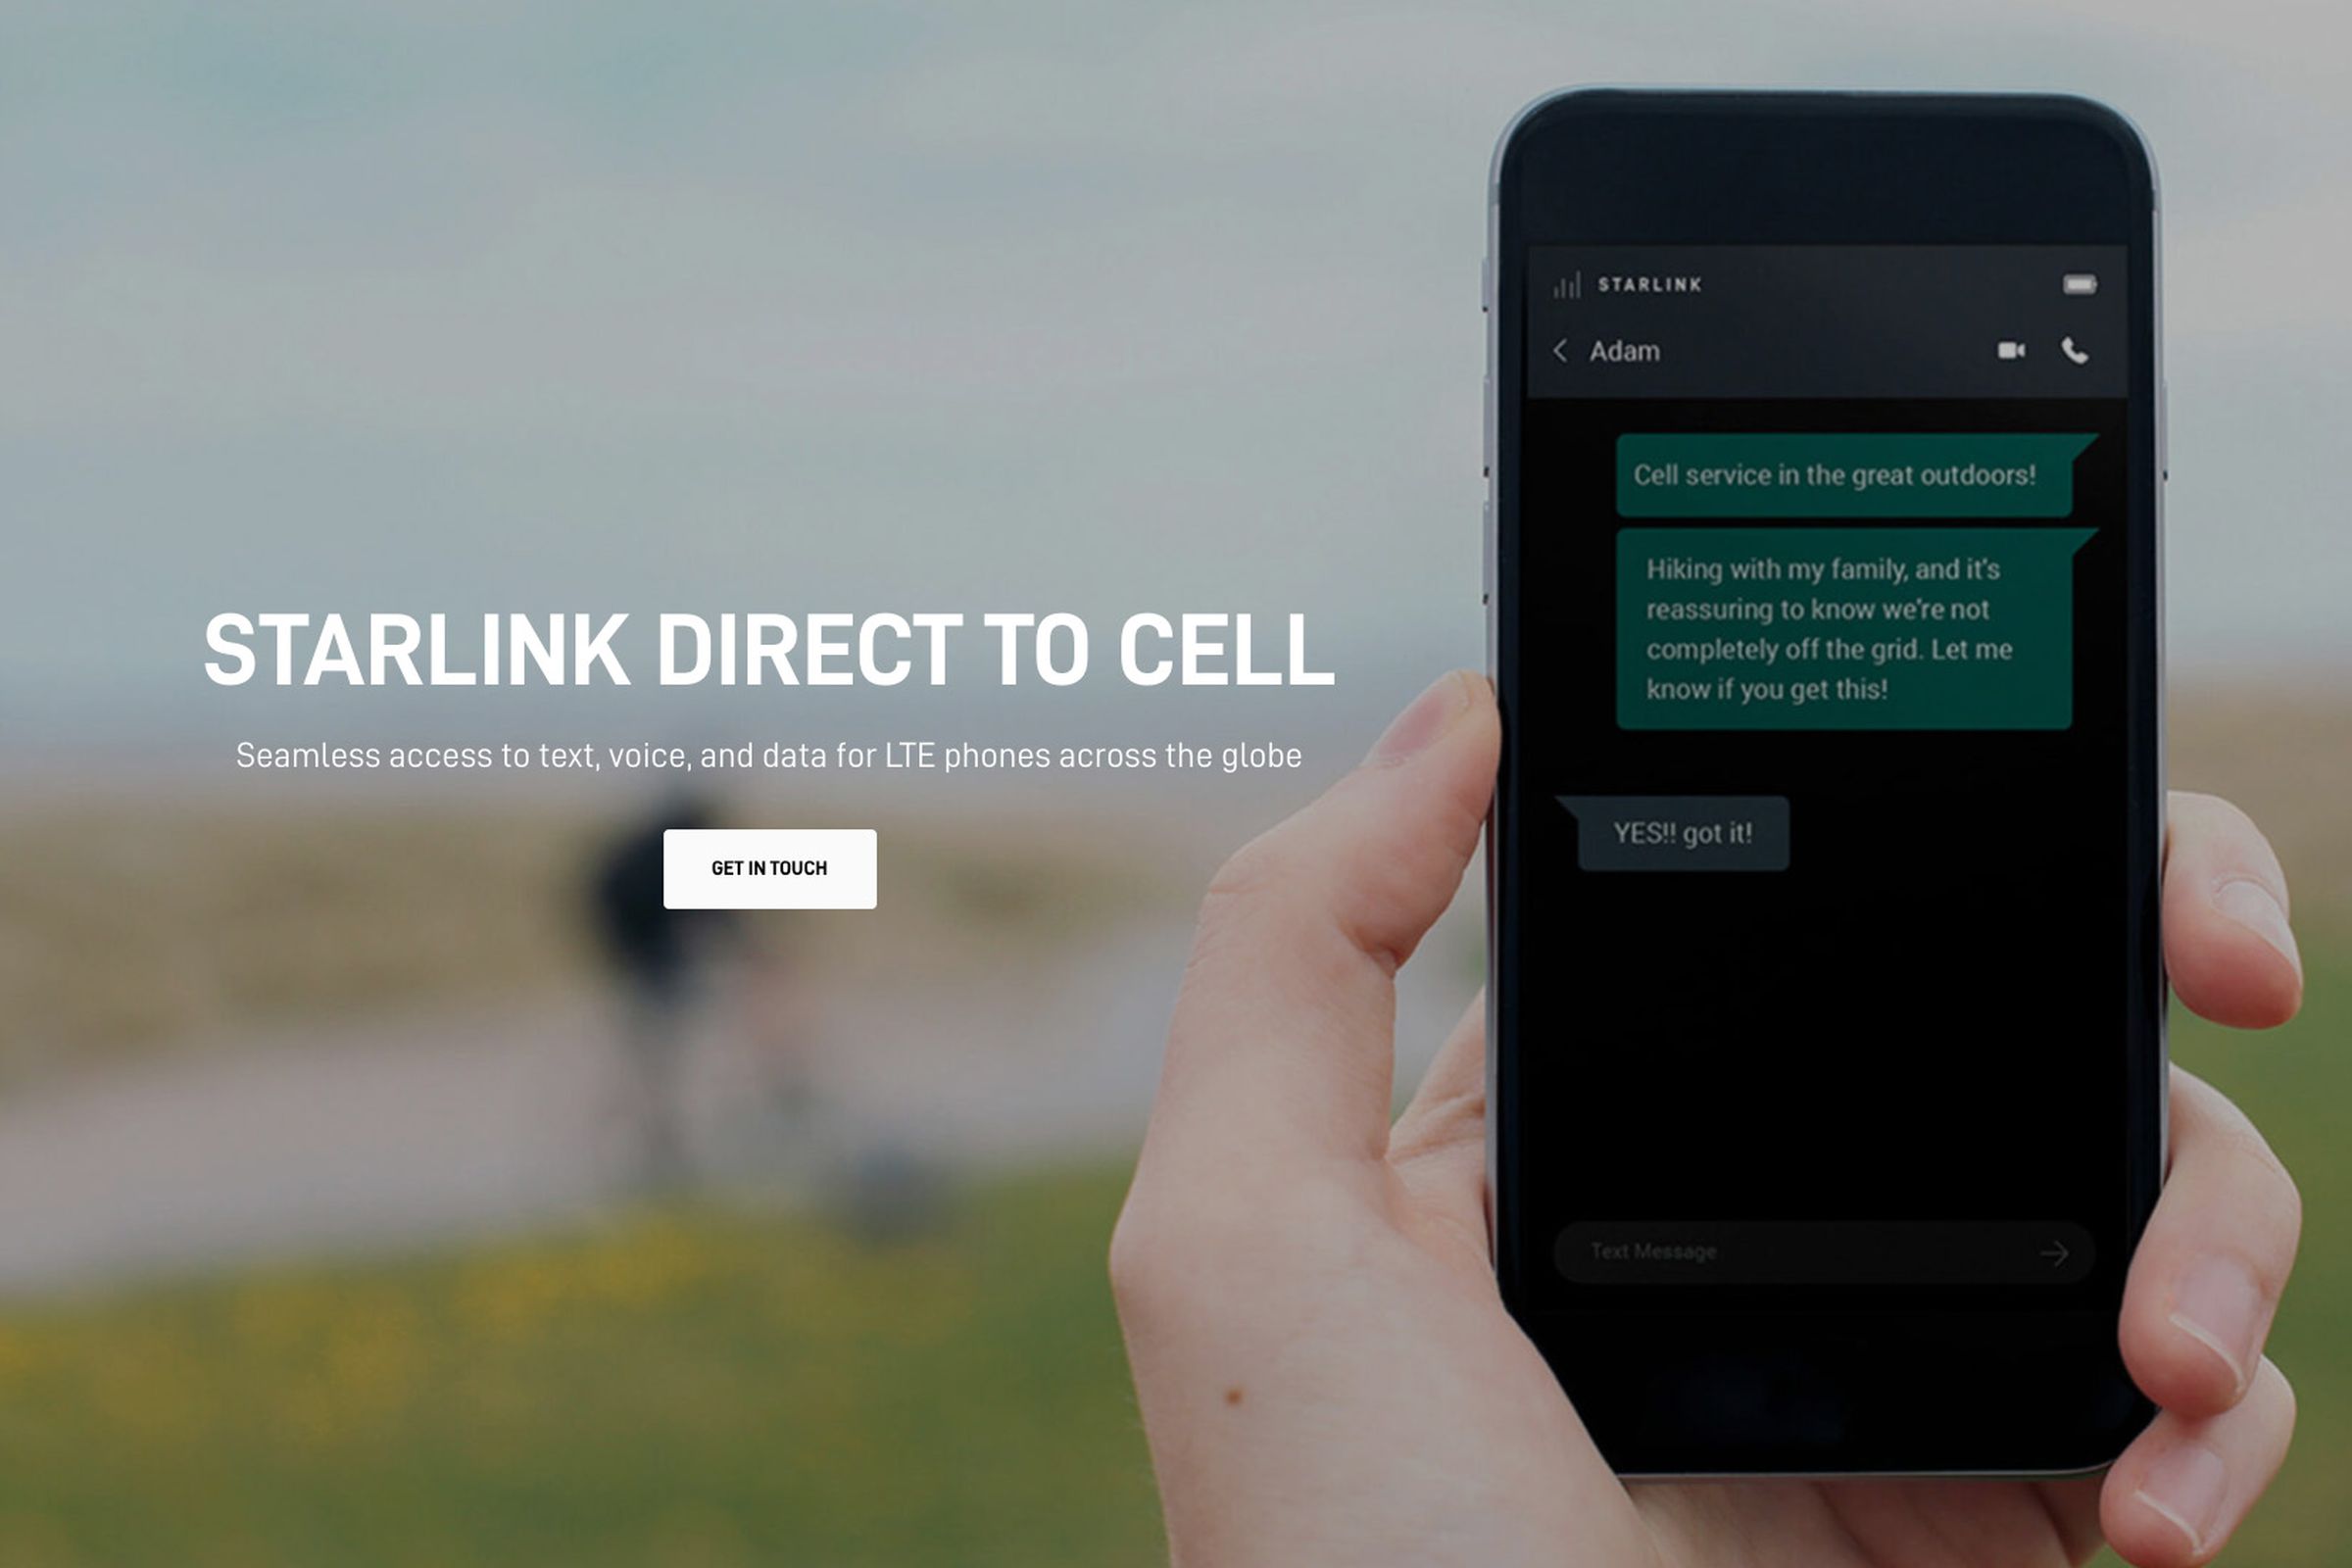 Starlink Direct to Cell homepage, with person holding phone showing text conversation.